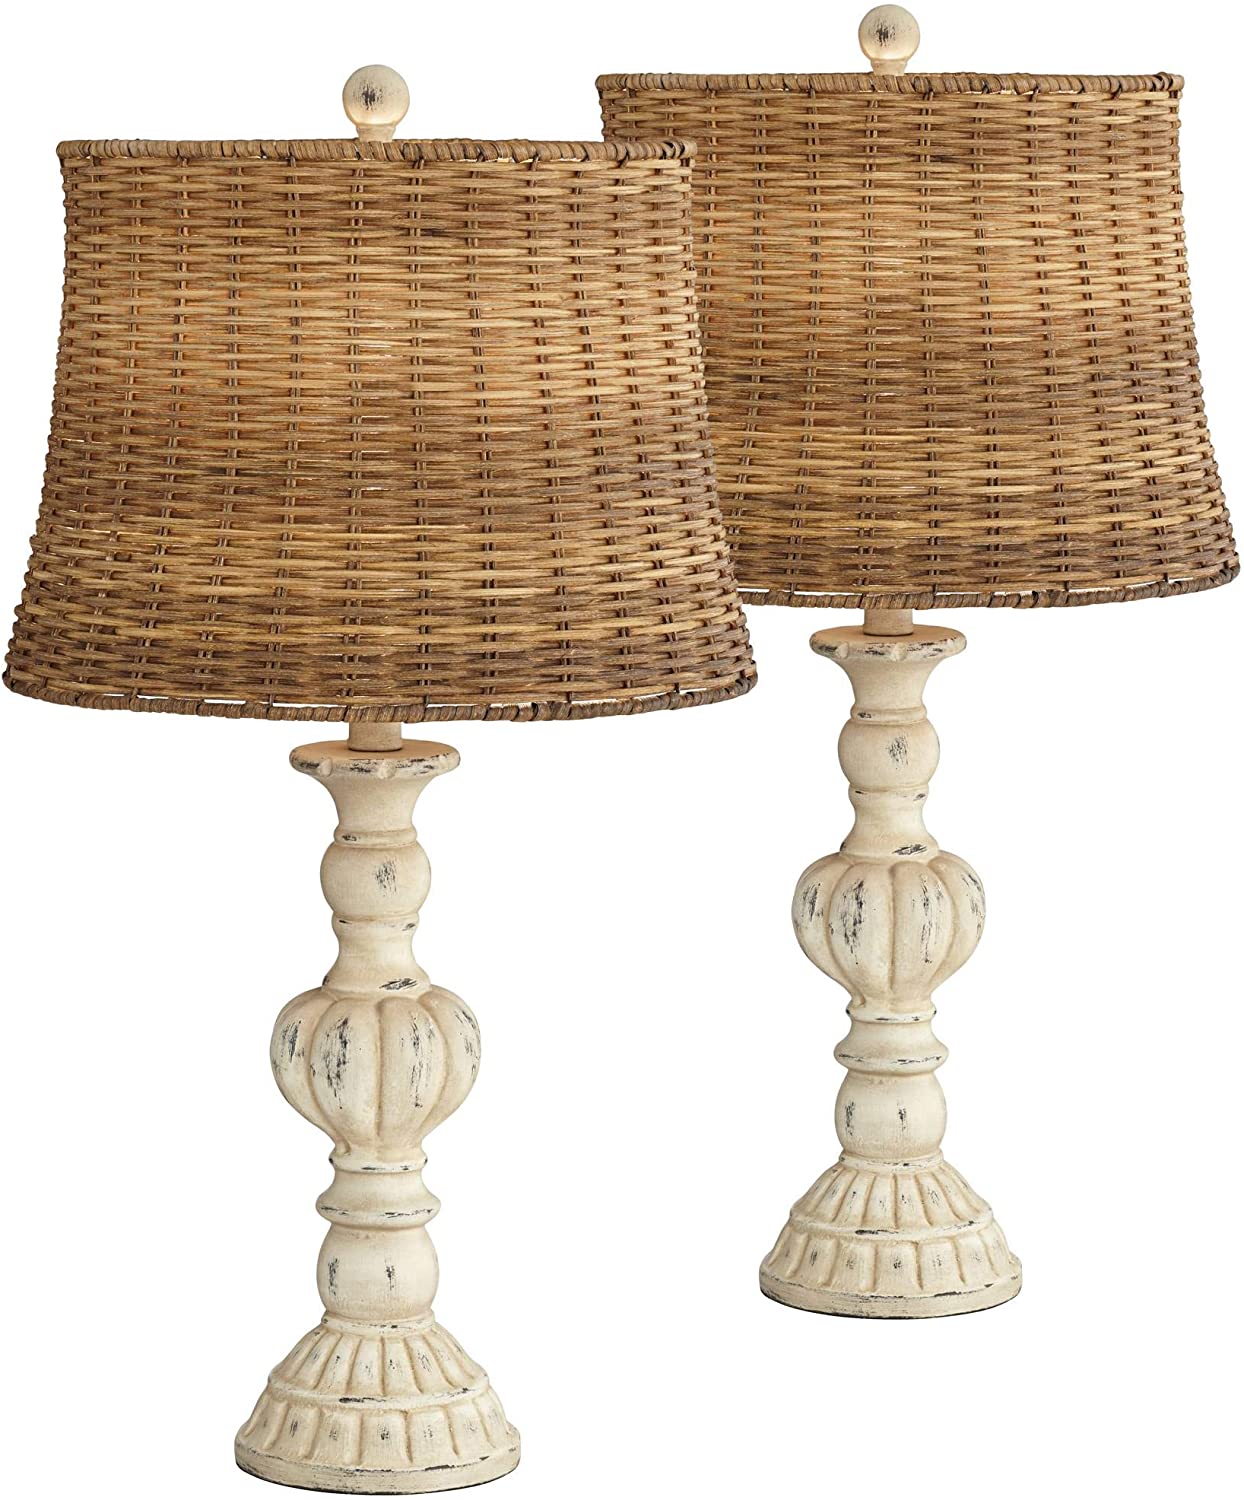 New PAIR Distress White Candlestick Table Lamps w/ Wicker - Rattan Lam